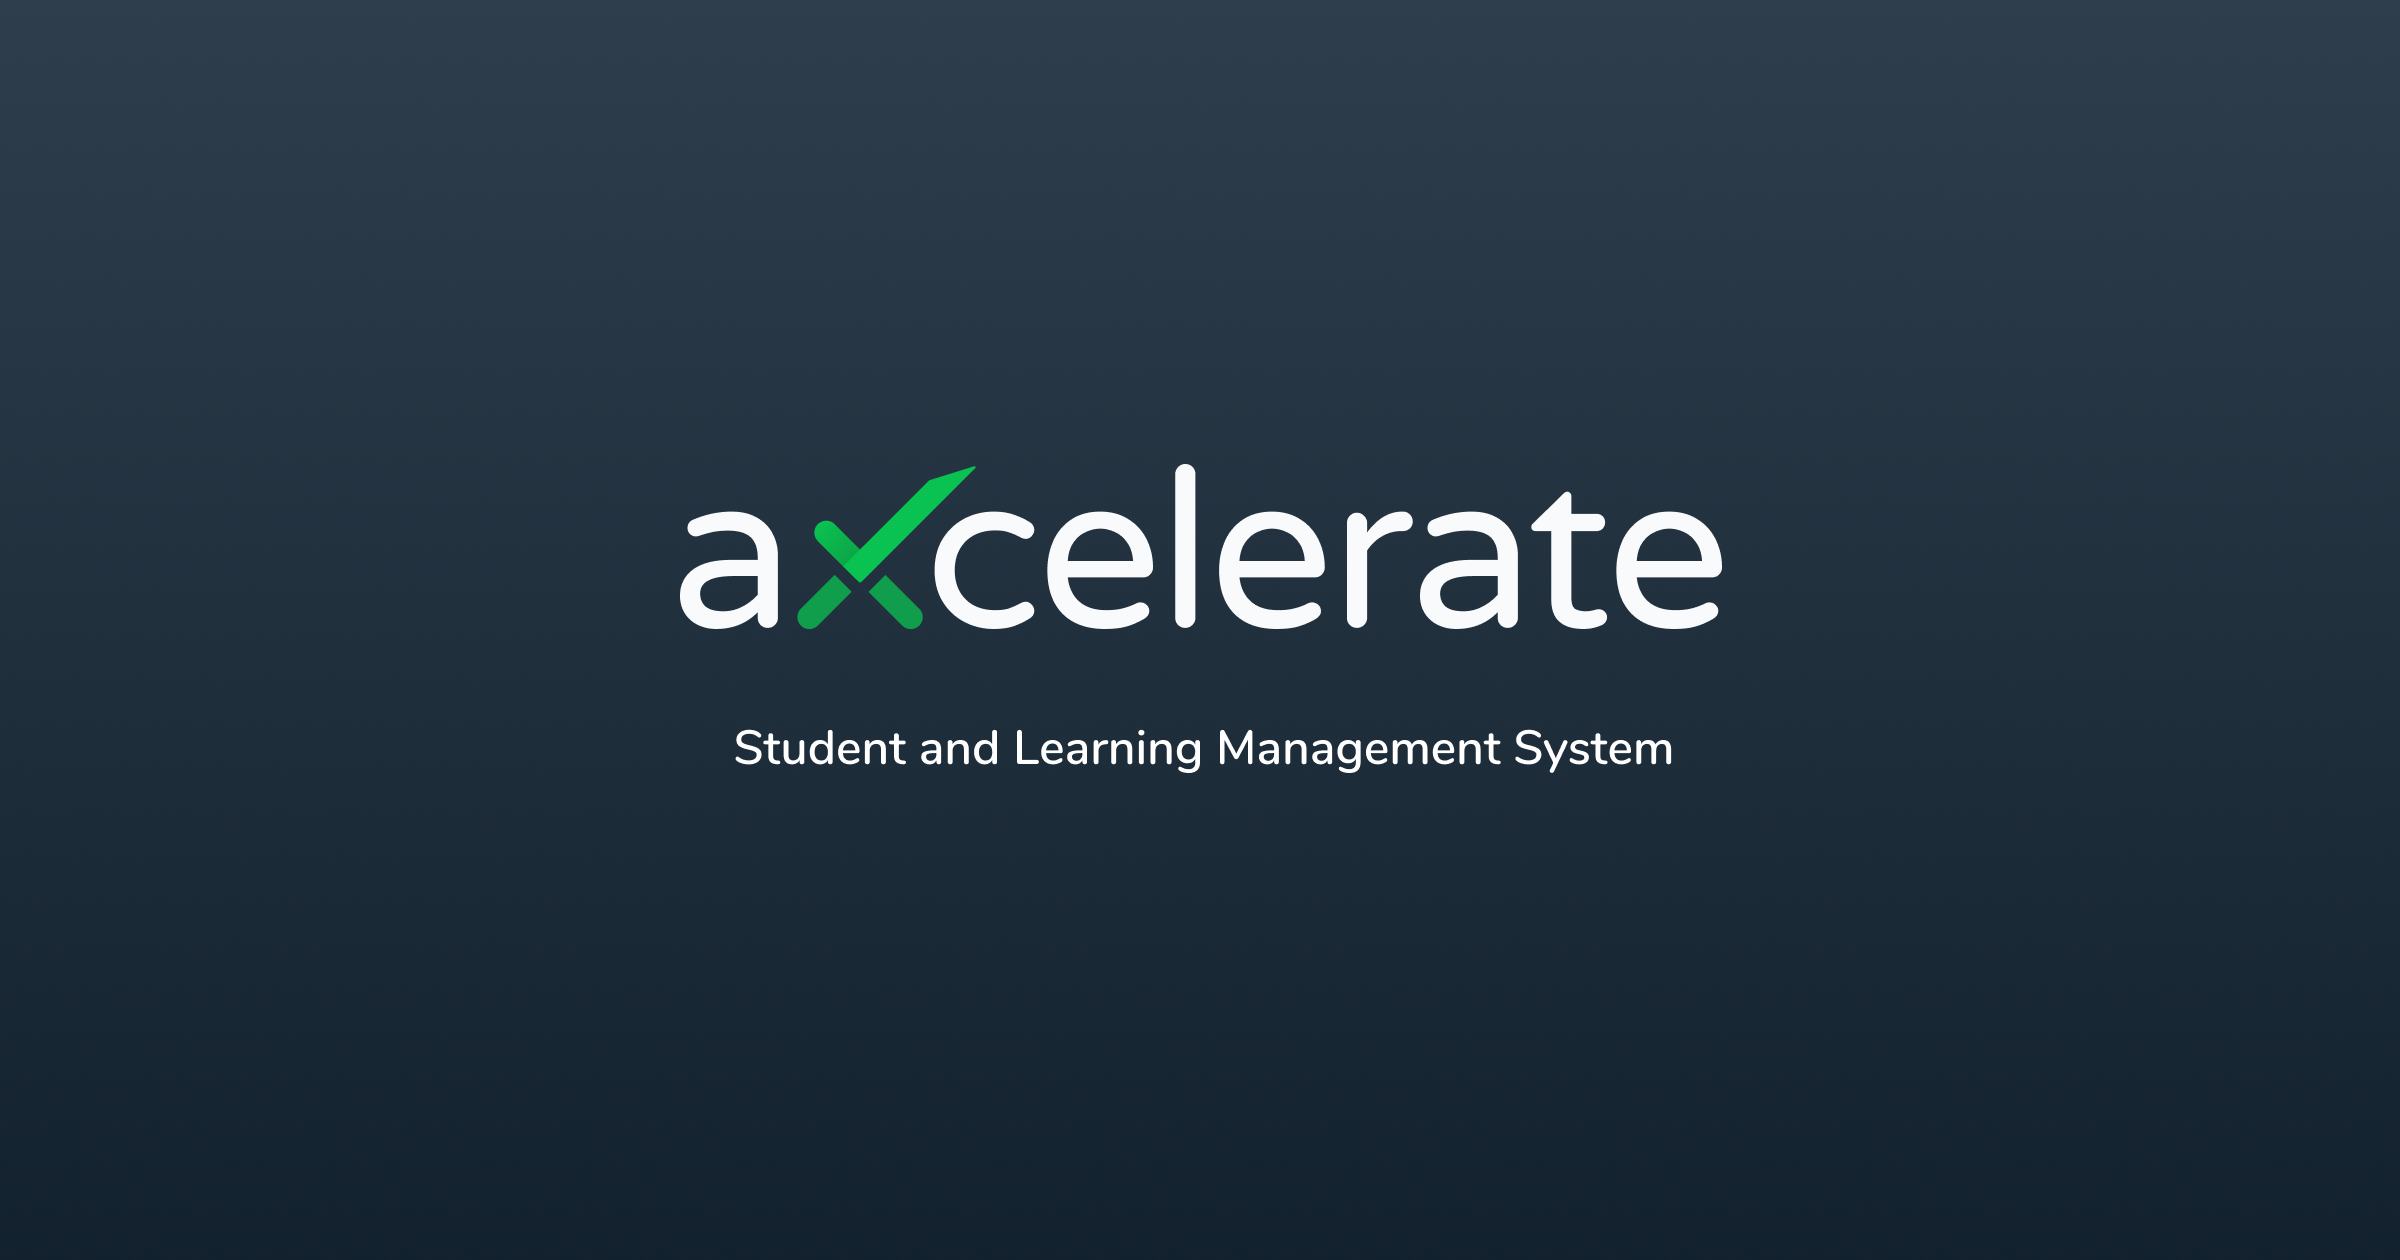 aXcelerate